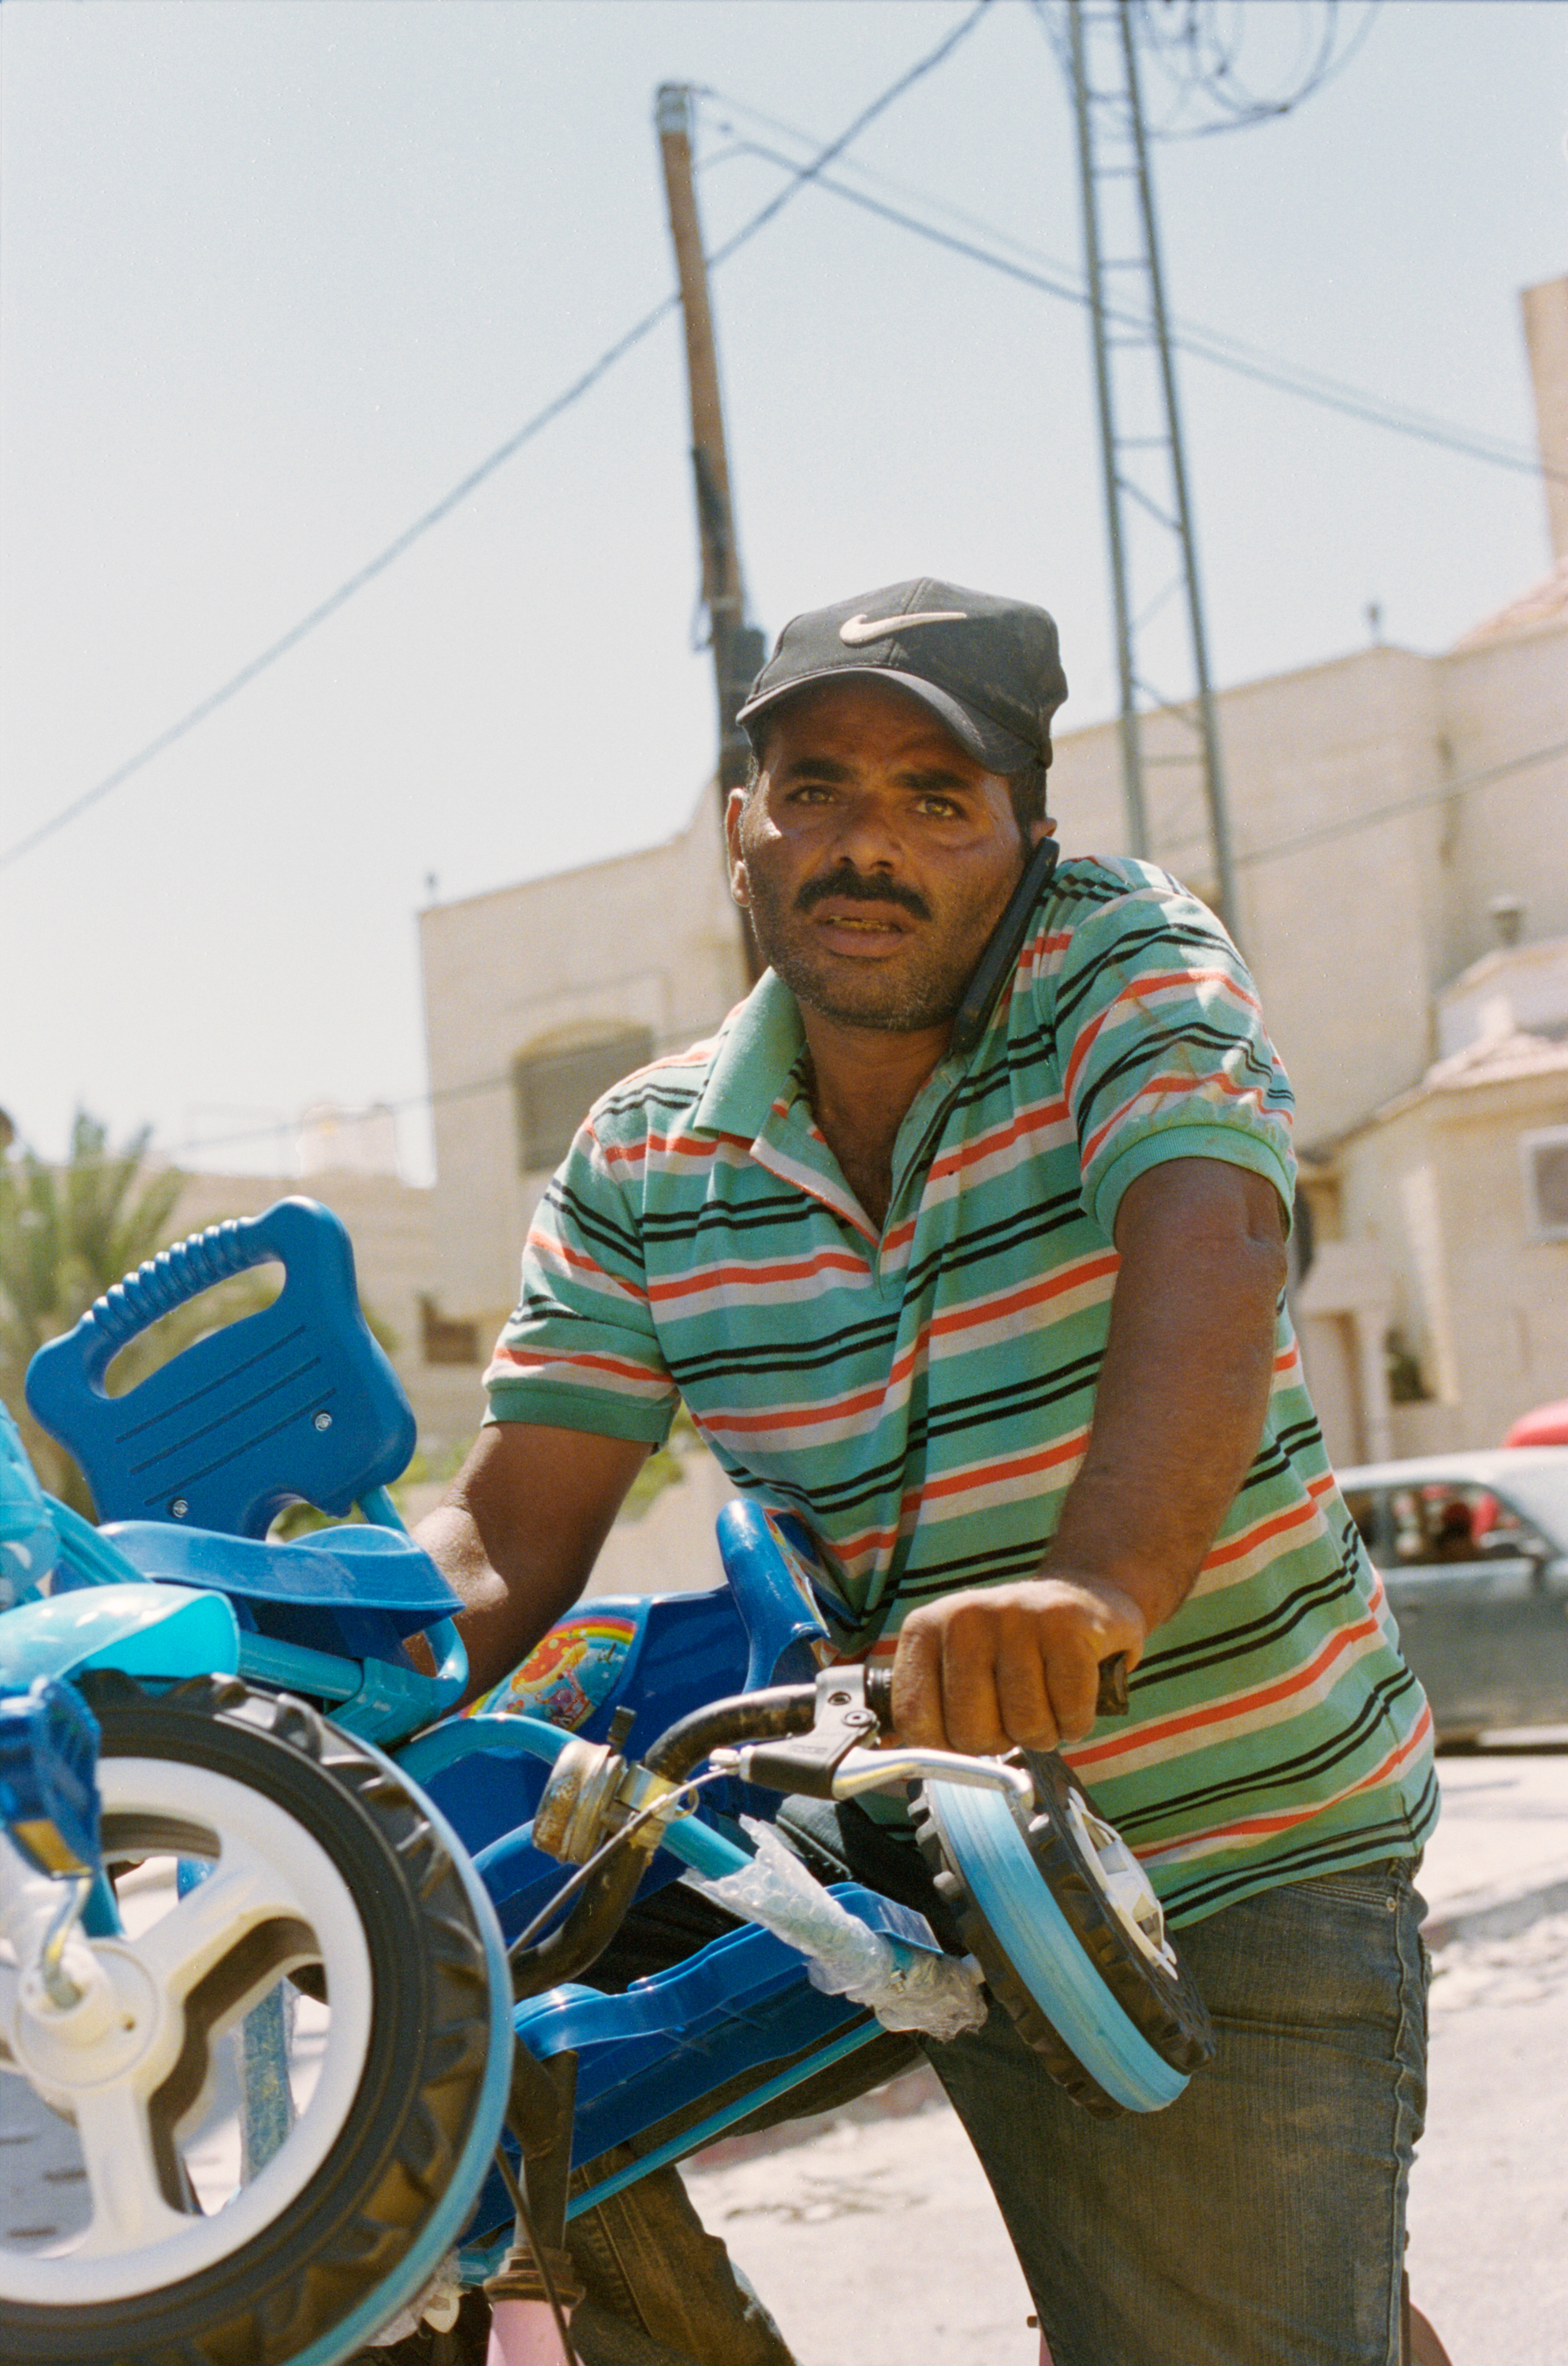 Man with Two Bikes, Jericho, 2018